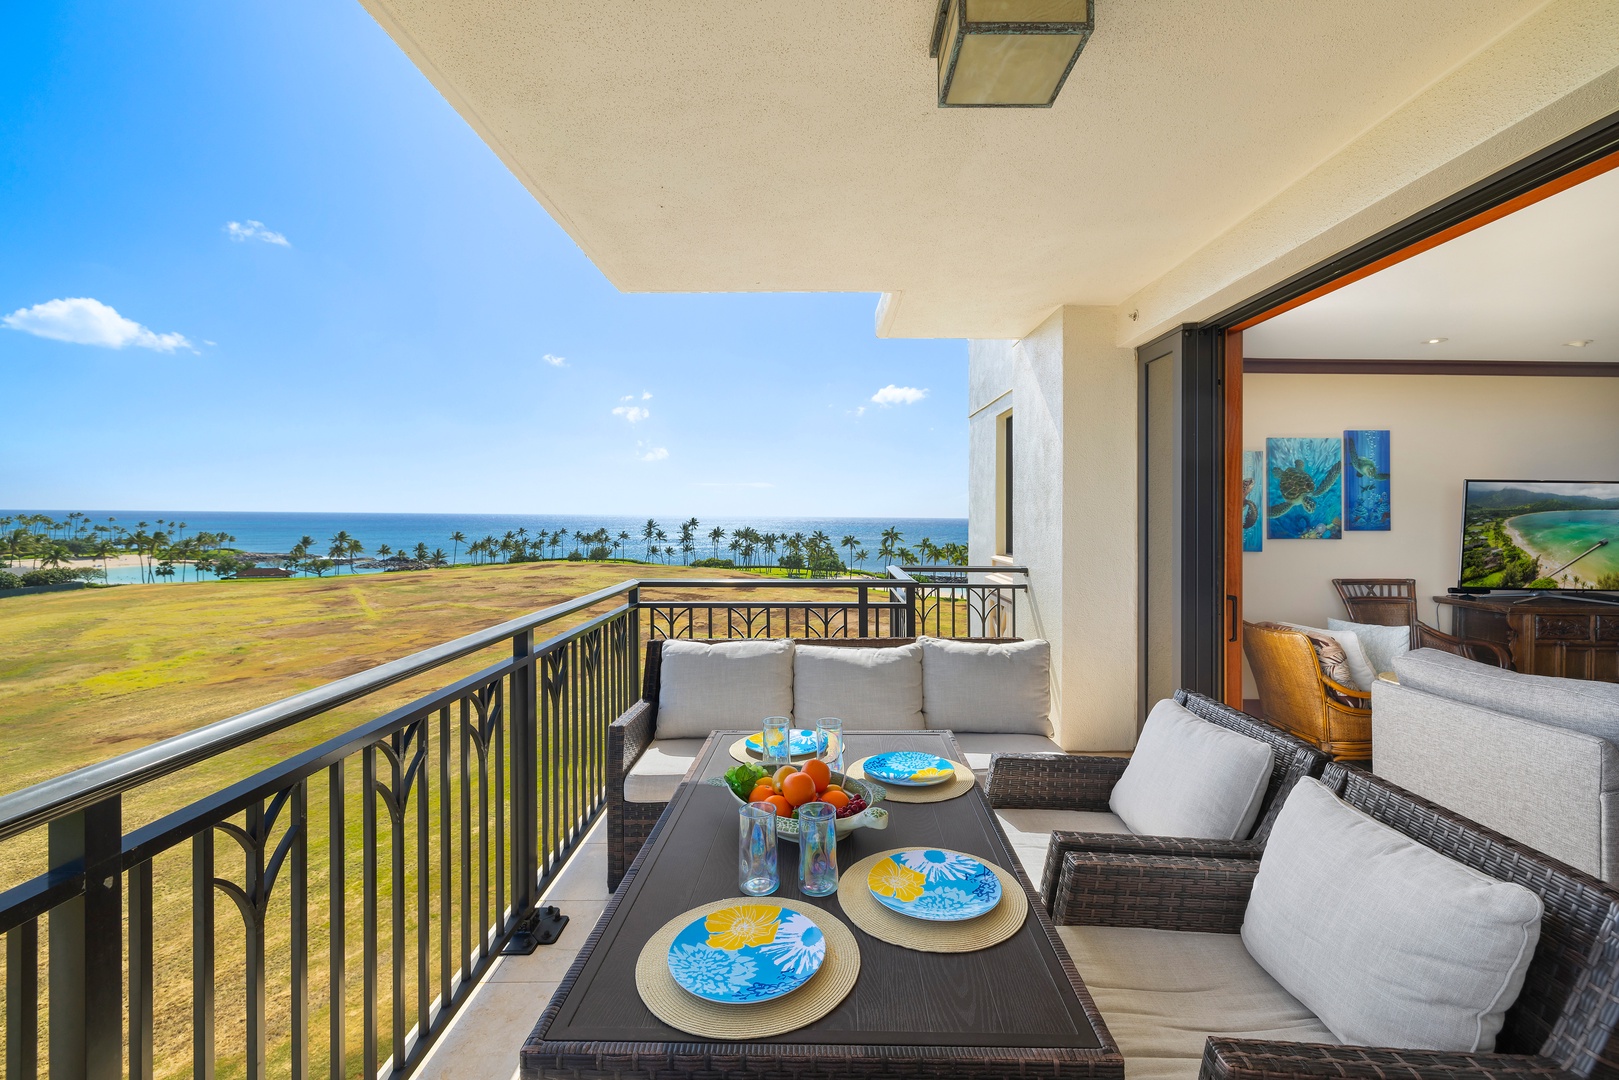 Kapolei Vacation Rentals, Ko Olina Beach Villas O724 - Enjoy meals with a view on this breezy lanai, overlooking the golf course and the endless blue sea.